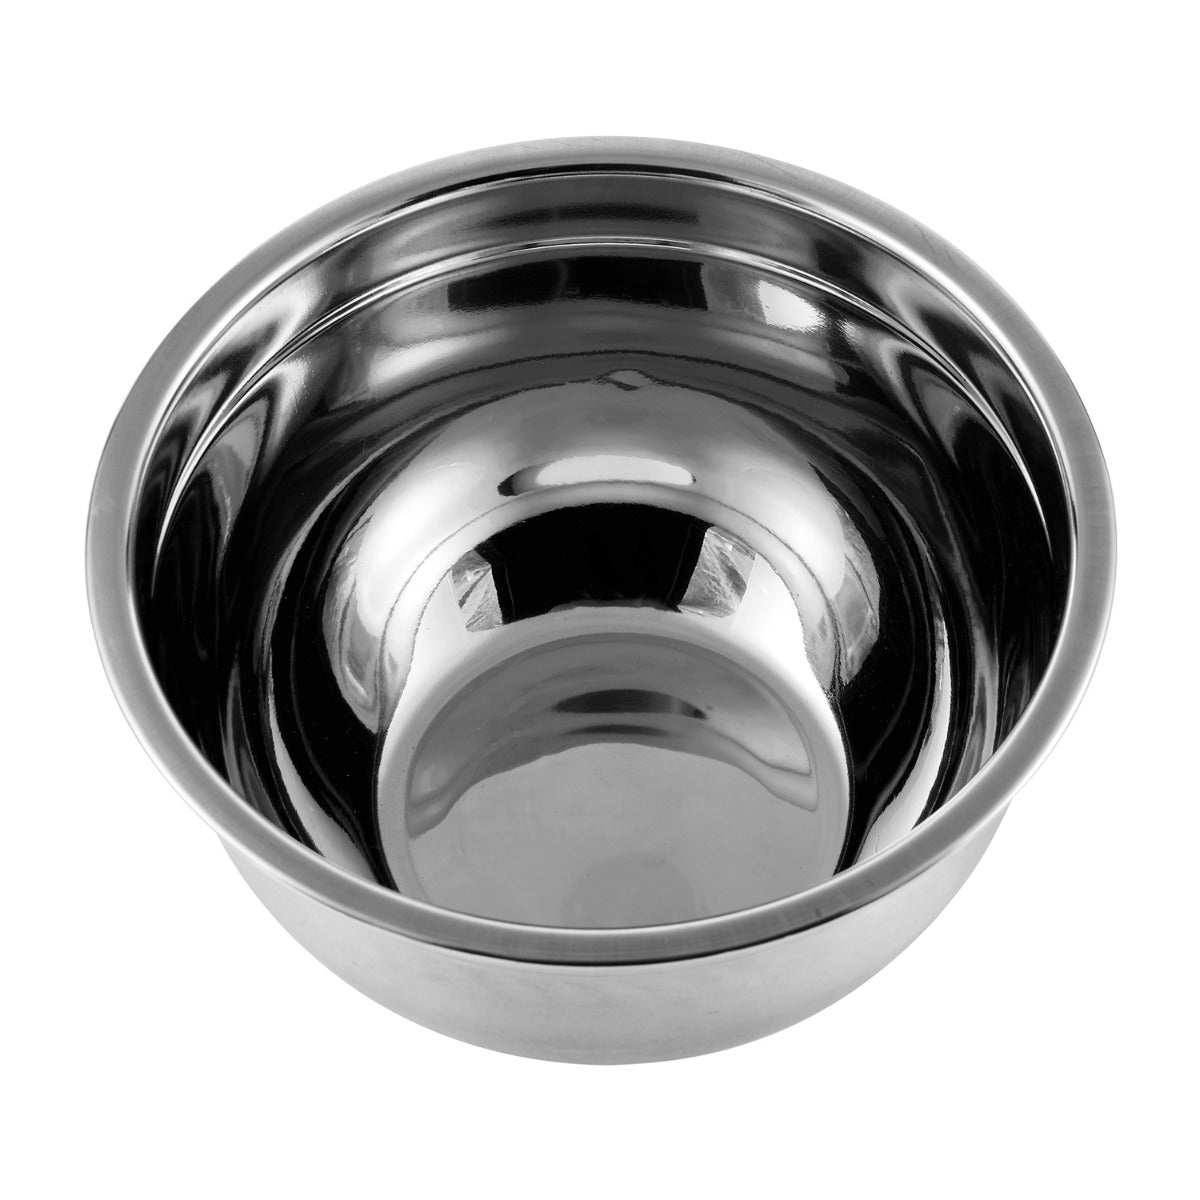 Kraft Stainless Steel Serving Bowl with Lid